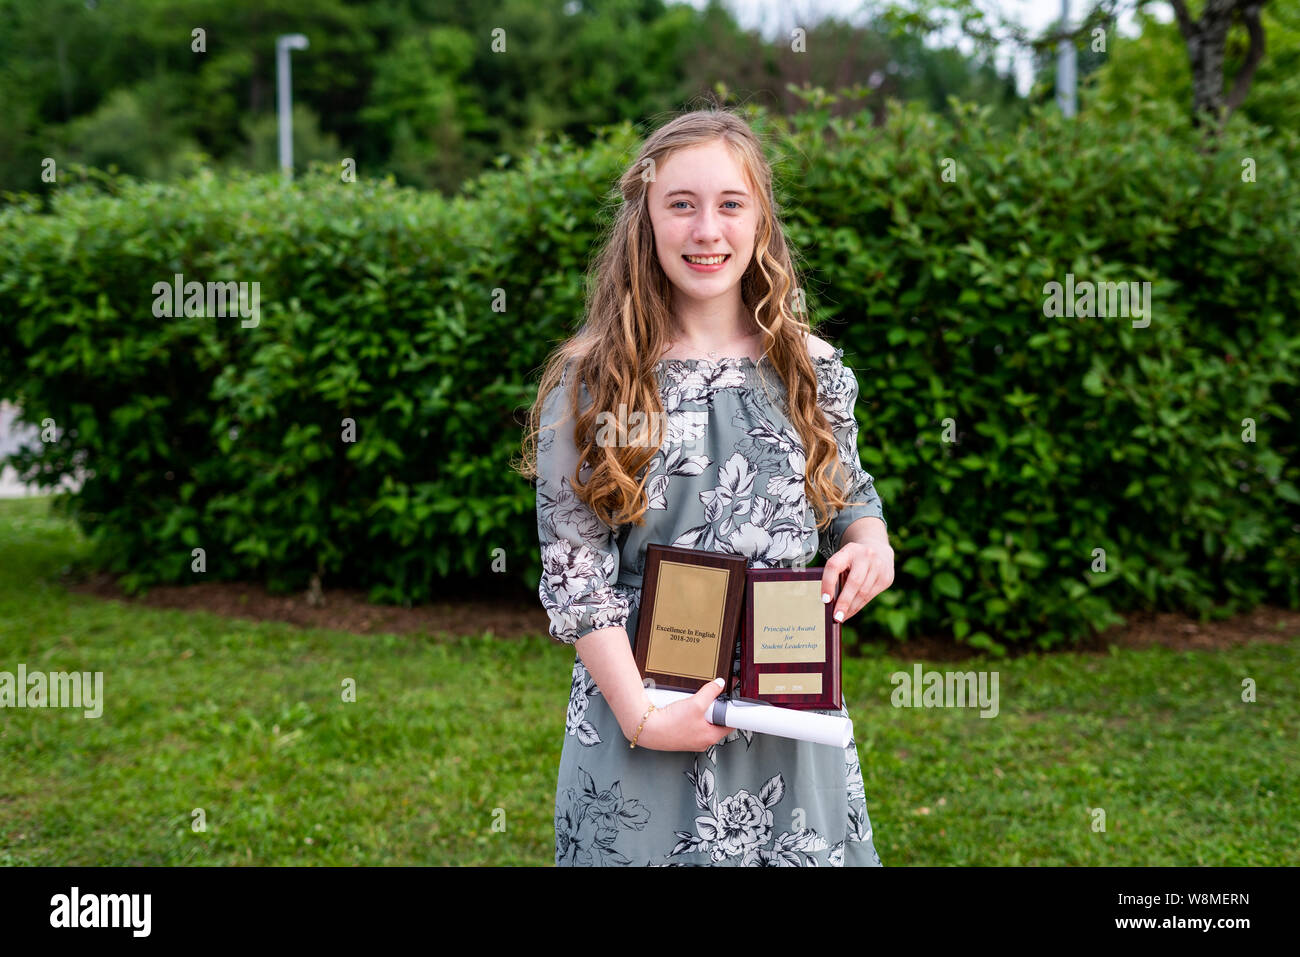 Young teen girl/Middle school student standing in front of a bush/garden after her graduation ceremony while holding a diploma and academic awards. Stock Photo